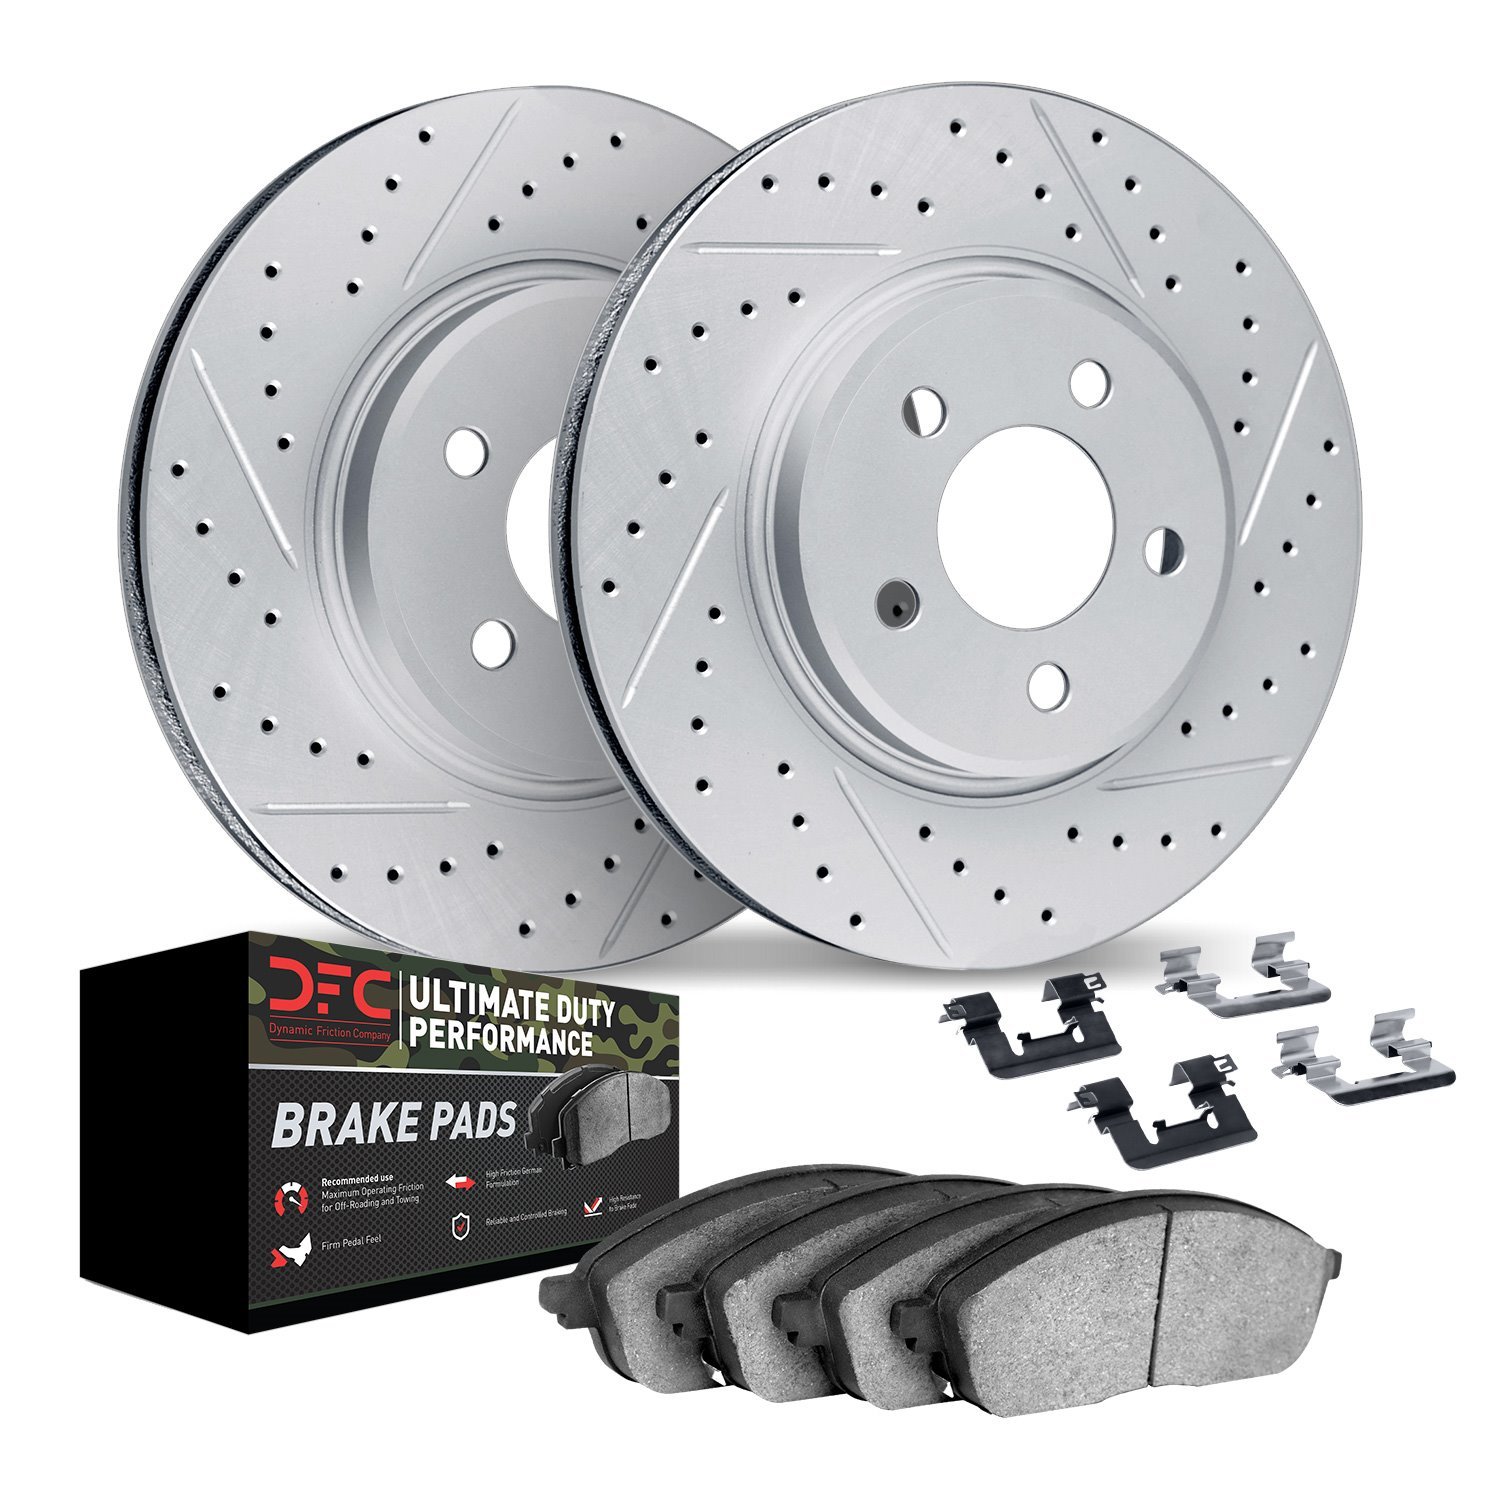 2412-54003 Geoperformance Drilled/Slotted Brake Rotors with Ultimate-Duty Brake Pads Kit & Hardware, 1986-1993 Ford/Lincoln/Merc